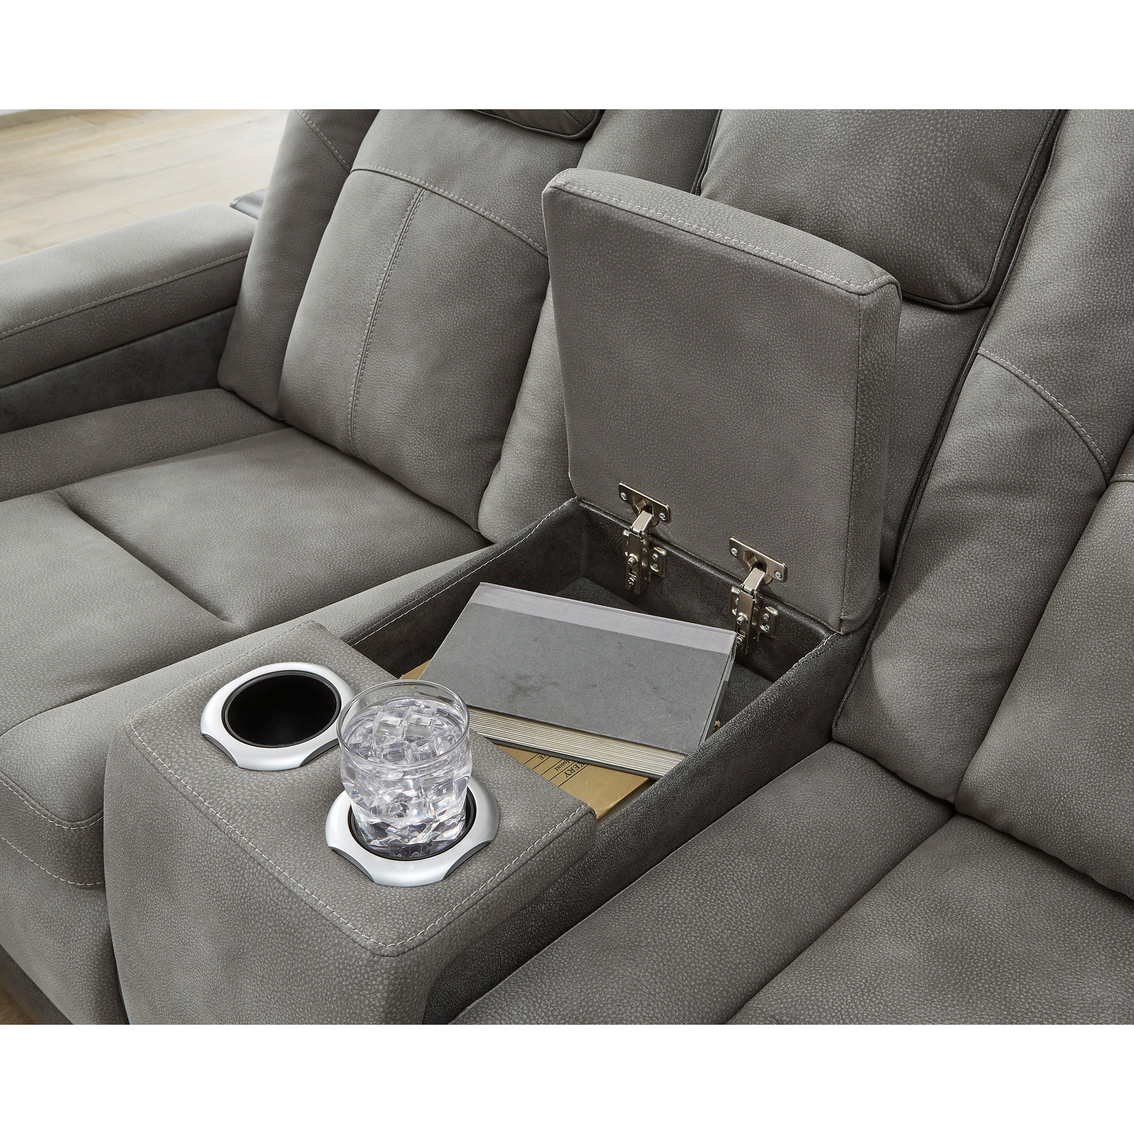 Signature Design by Ashley Next Gen DuraPella Power Reclining Loveseat with Console - Image 10 of 10